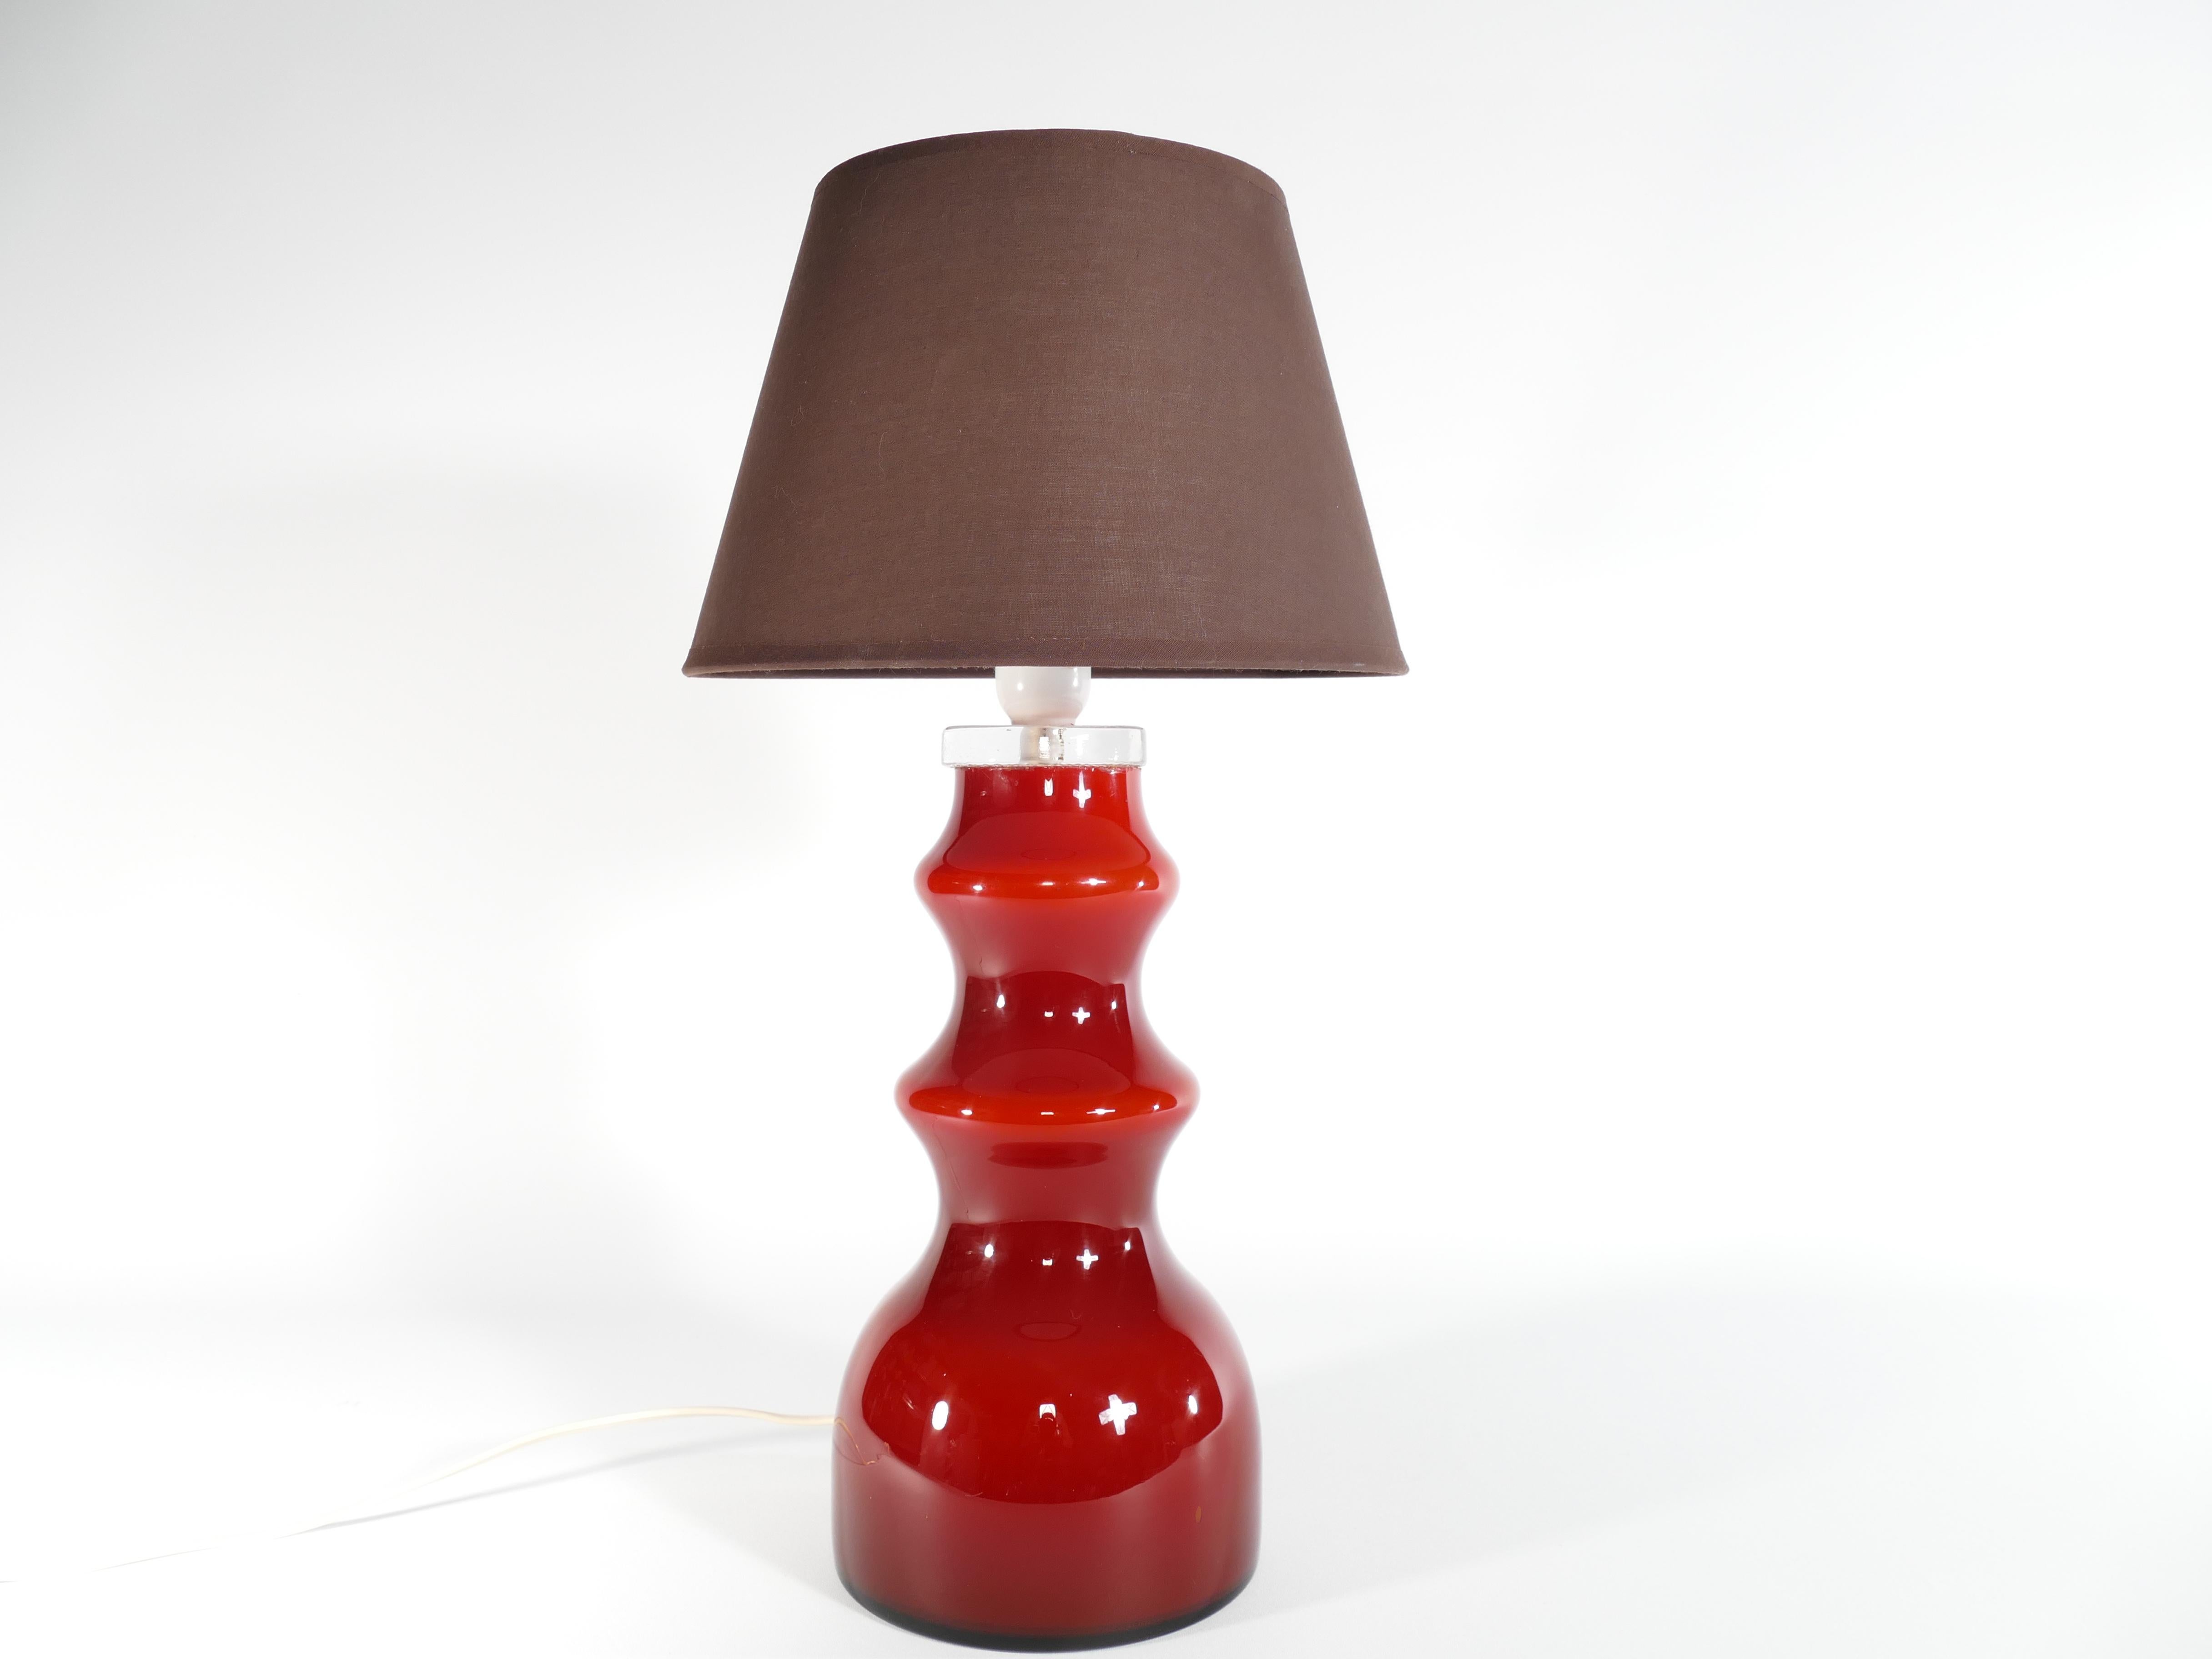 Mid-20th Century Scandinavian Modern Oxblood Red Table Lamp  by Gert Nyström for Hyllinge For Sale